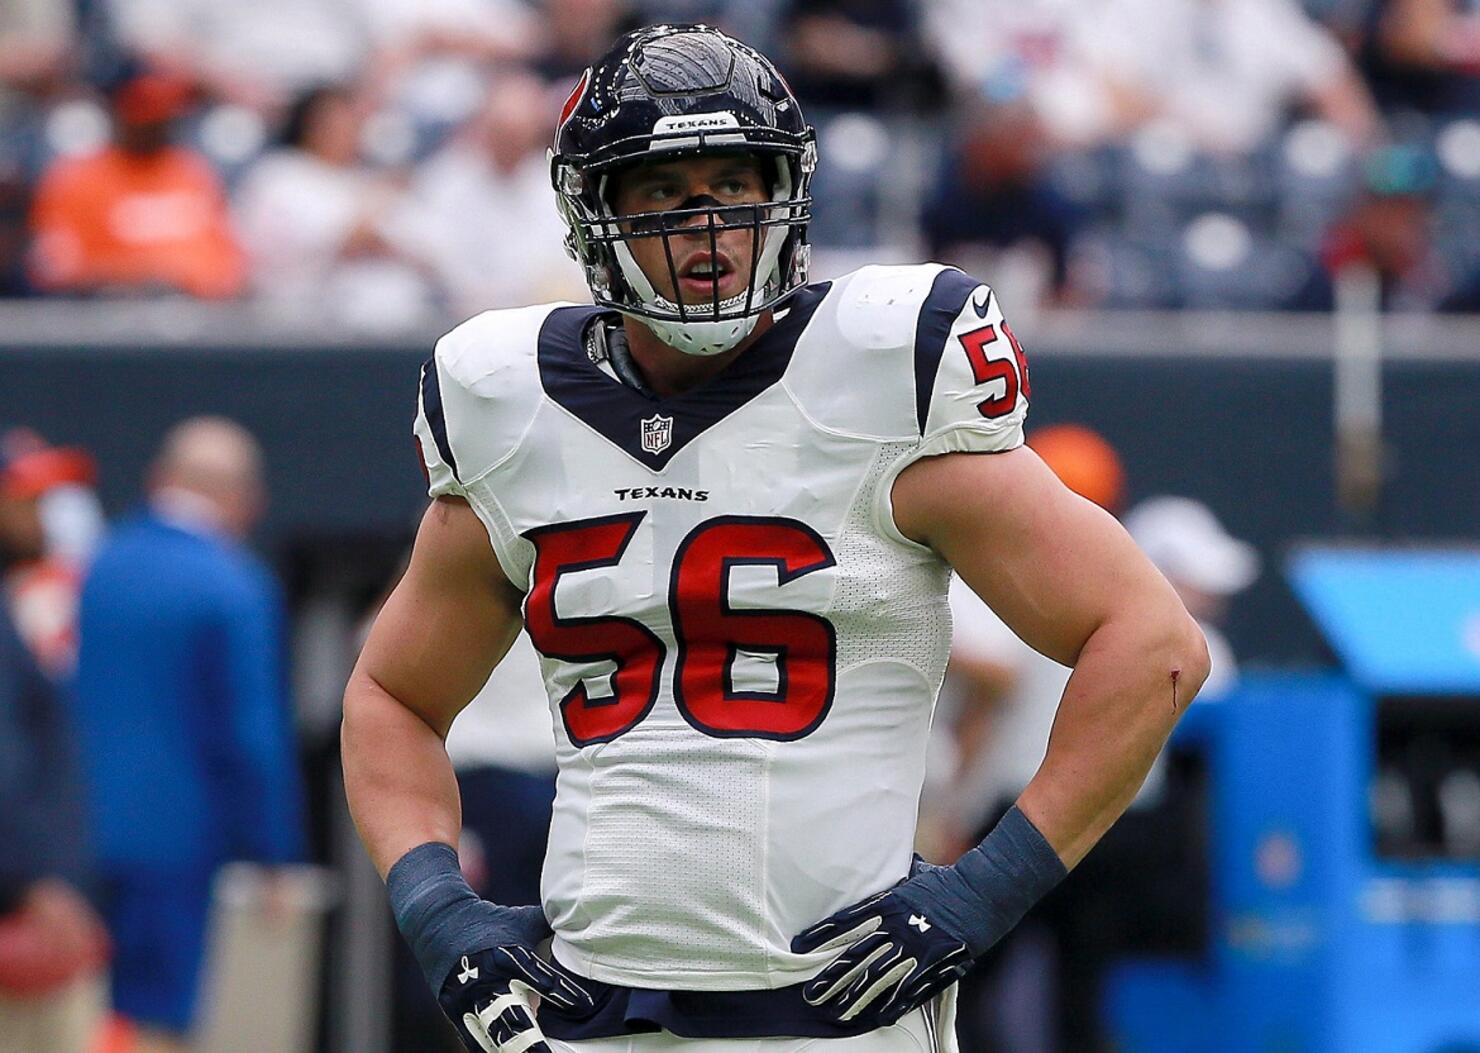 Texans Activate Brian Cushing to the 53-Man Roster